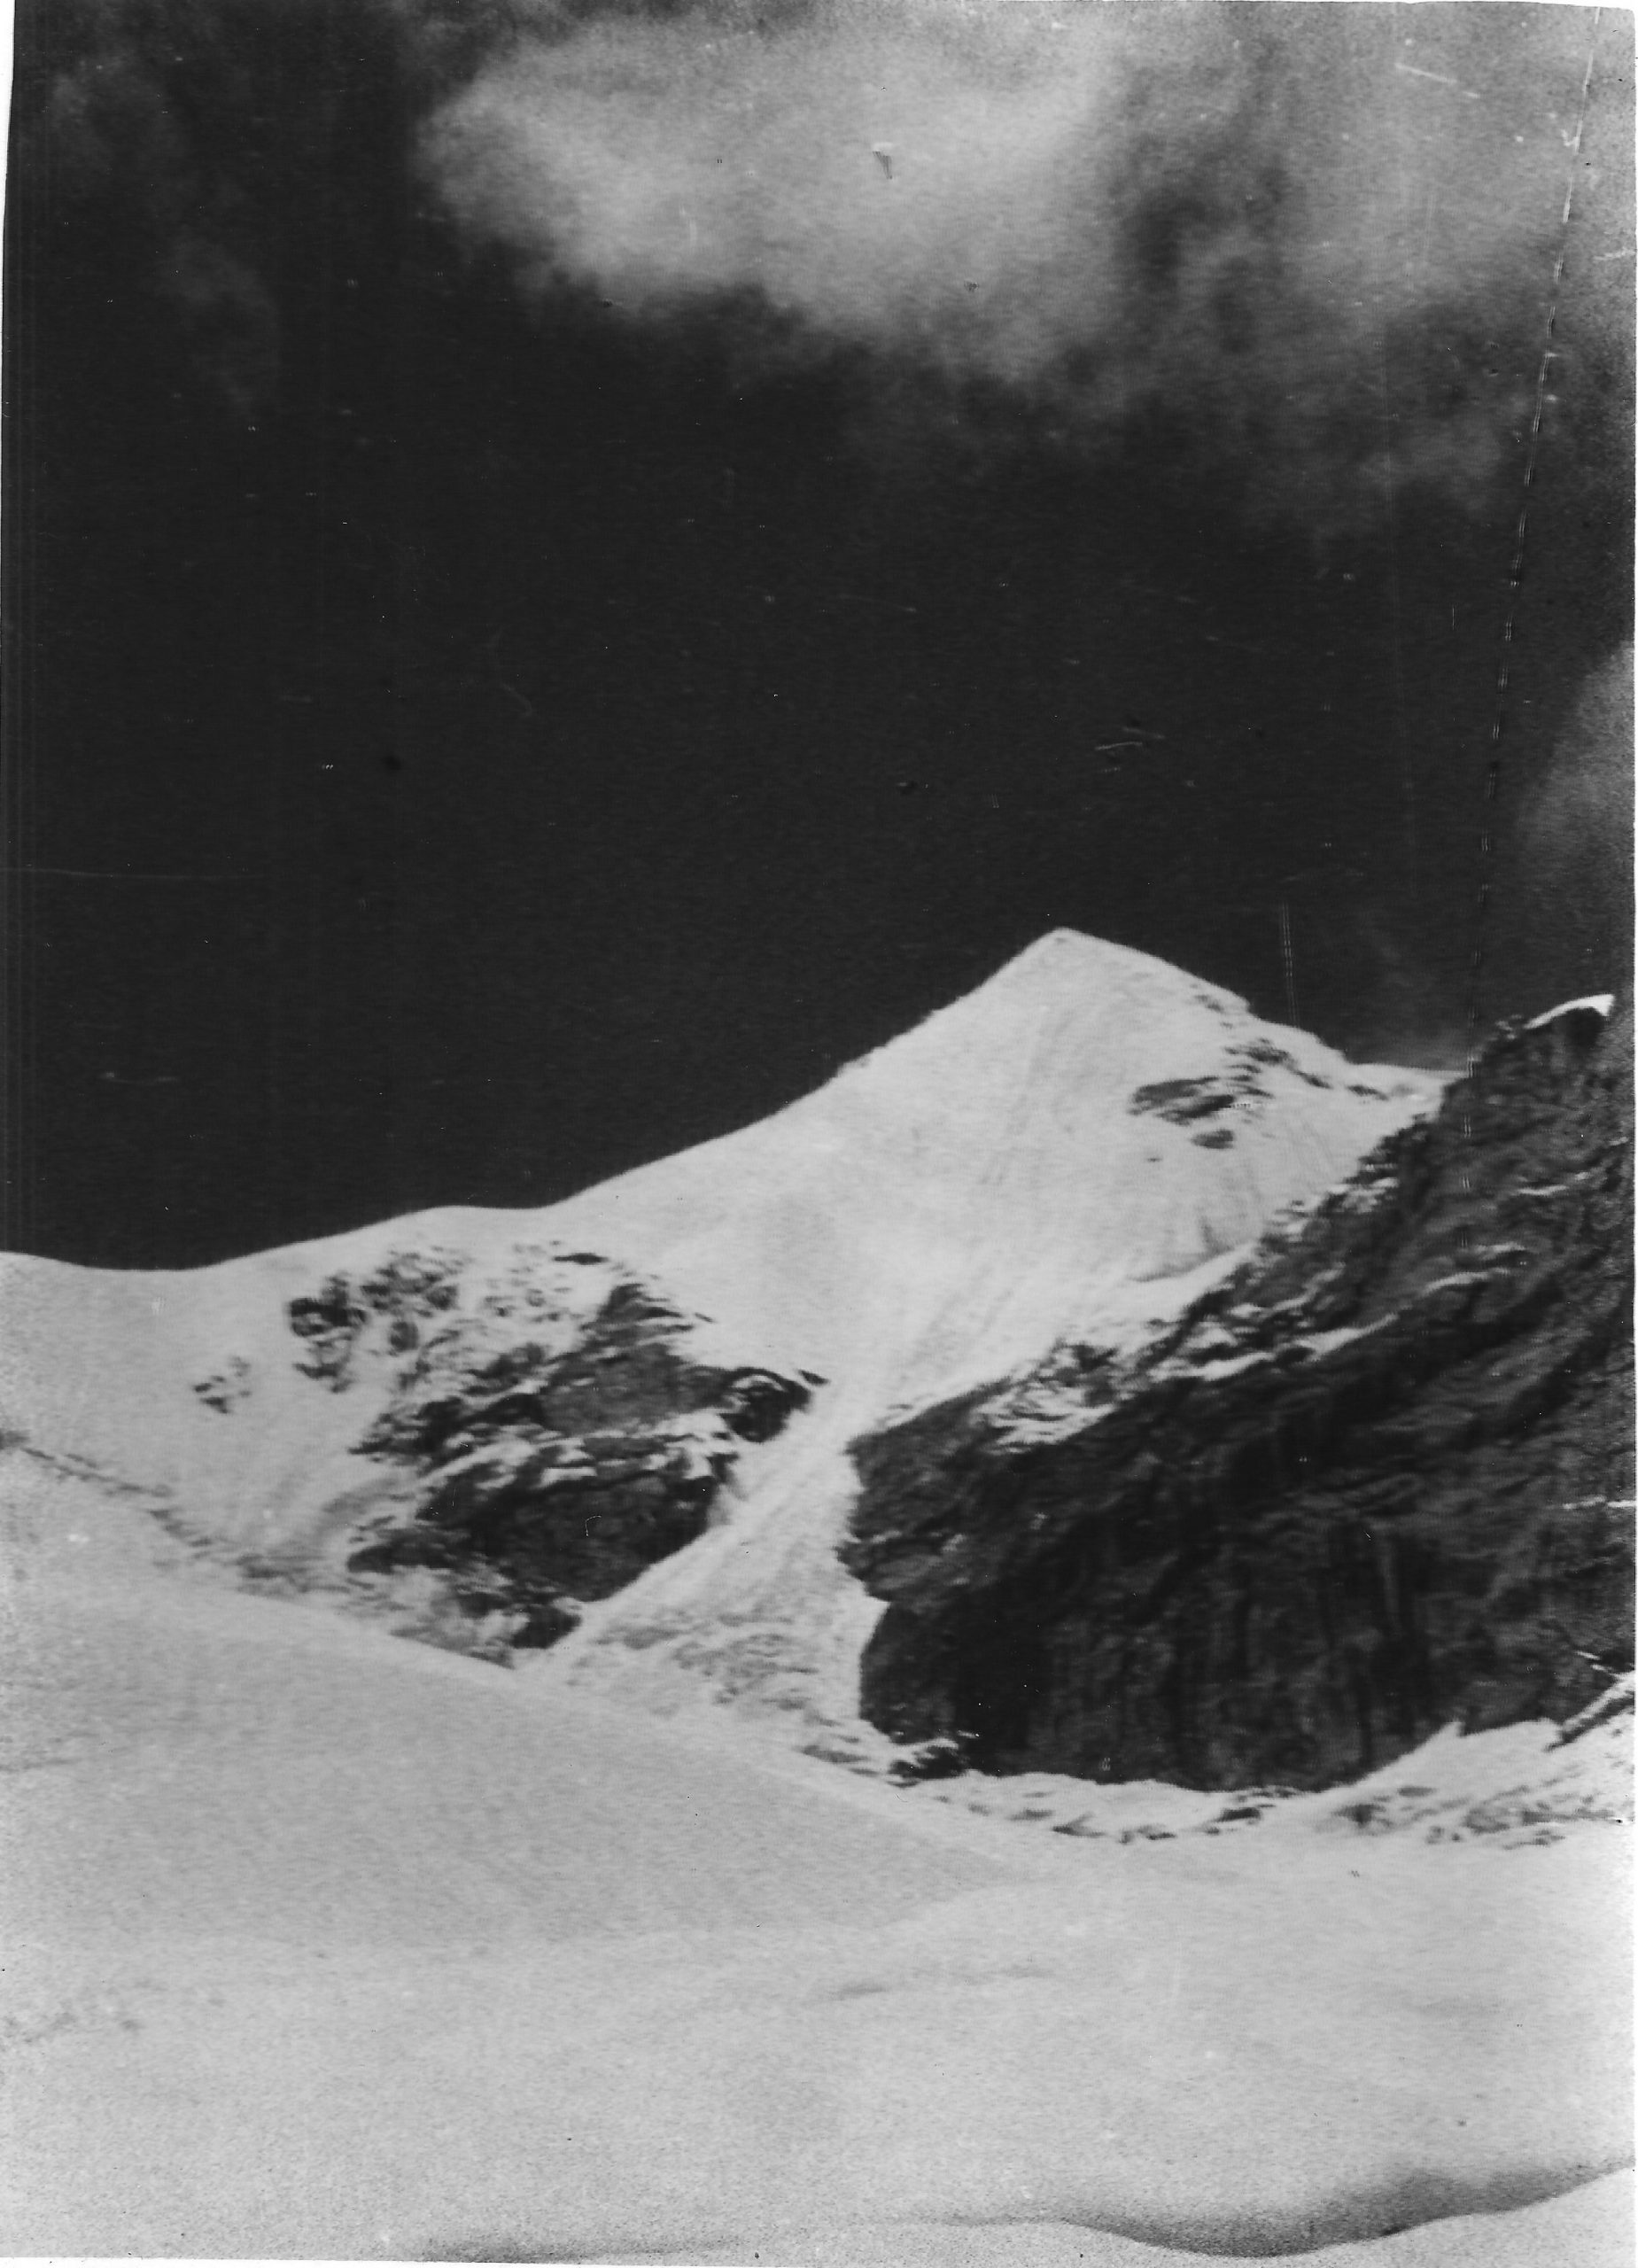 Lalana, a peak that has only been scaled once, was named by the expedition team 50 years ago [image by: Sudipta Sengupta]